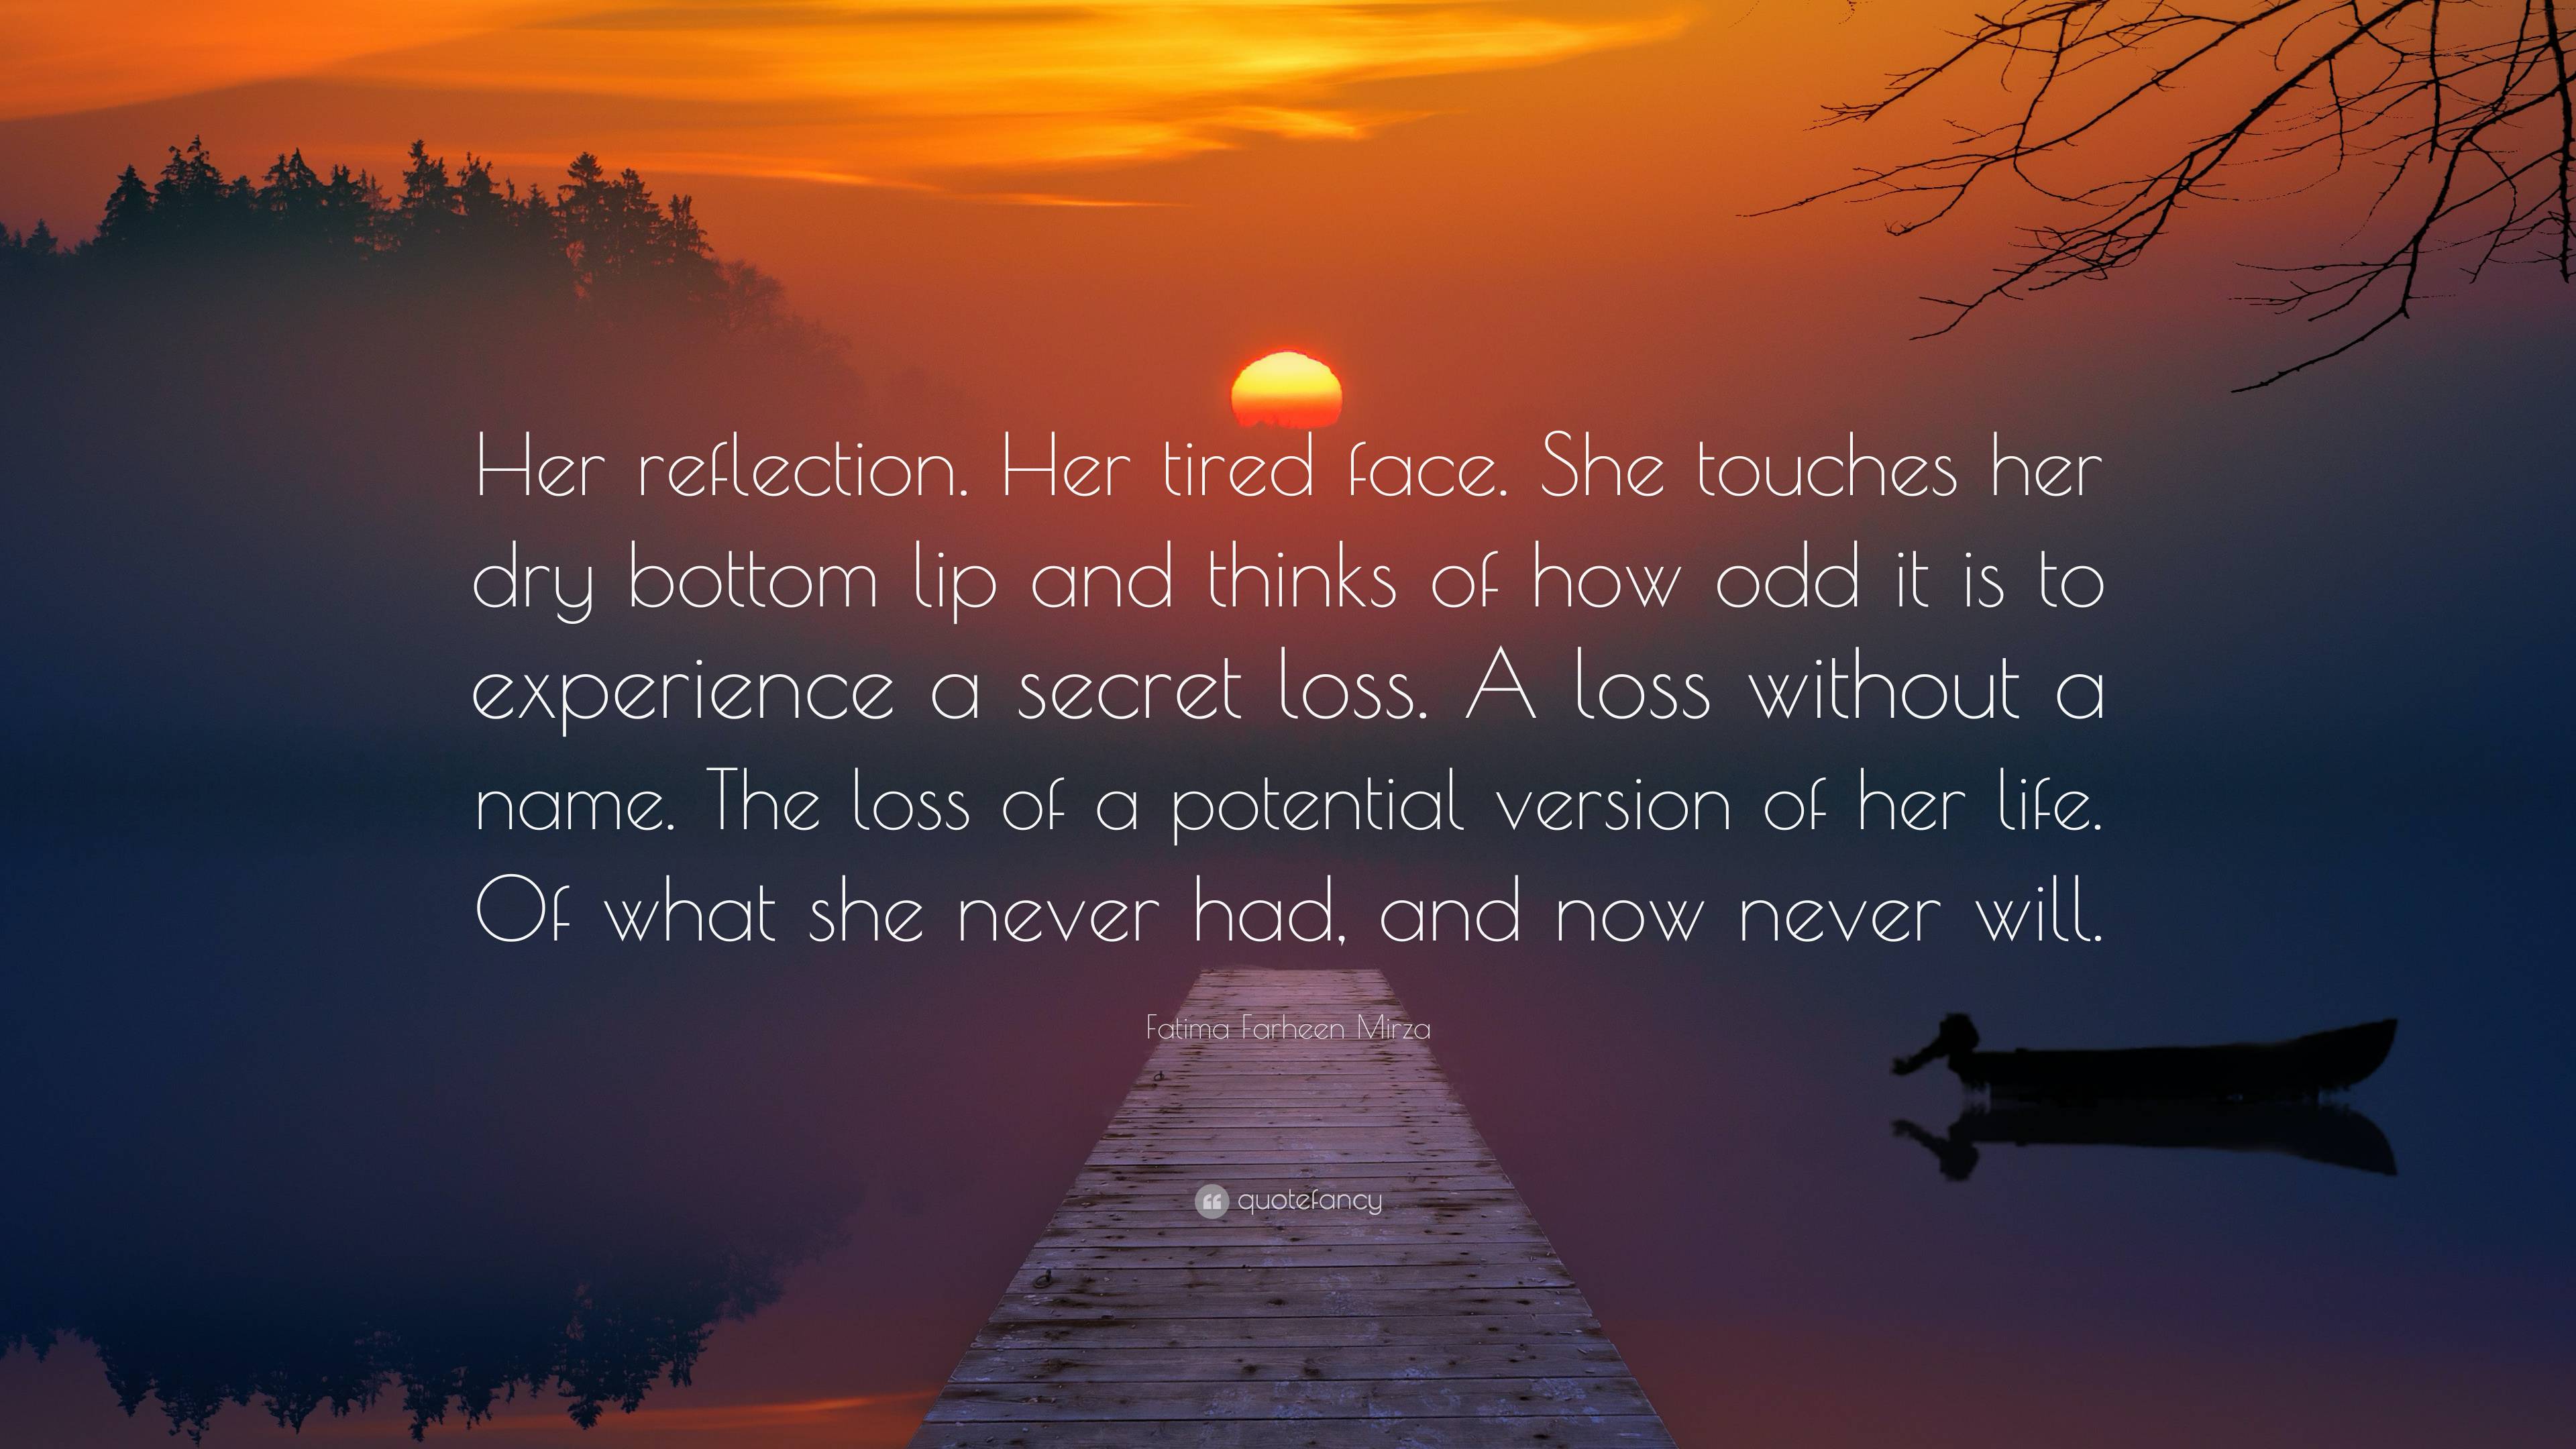 Fatima Farheen Mirza Quote: “Her reflection. Her tired face. She ...